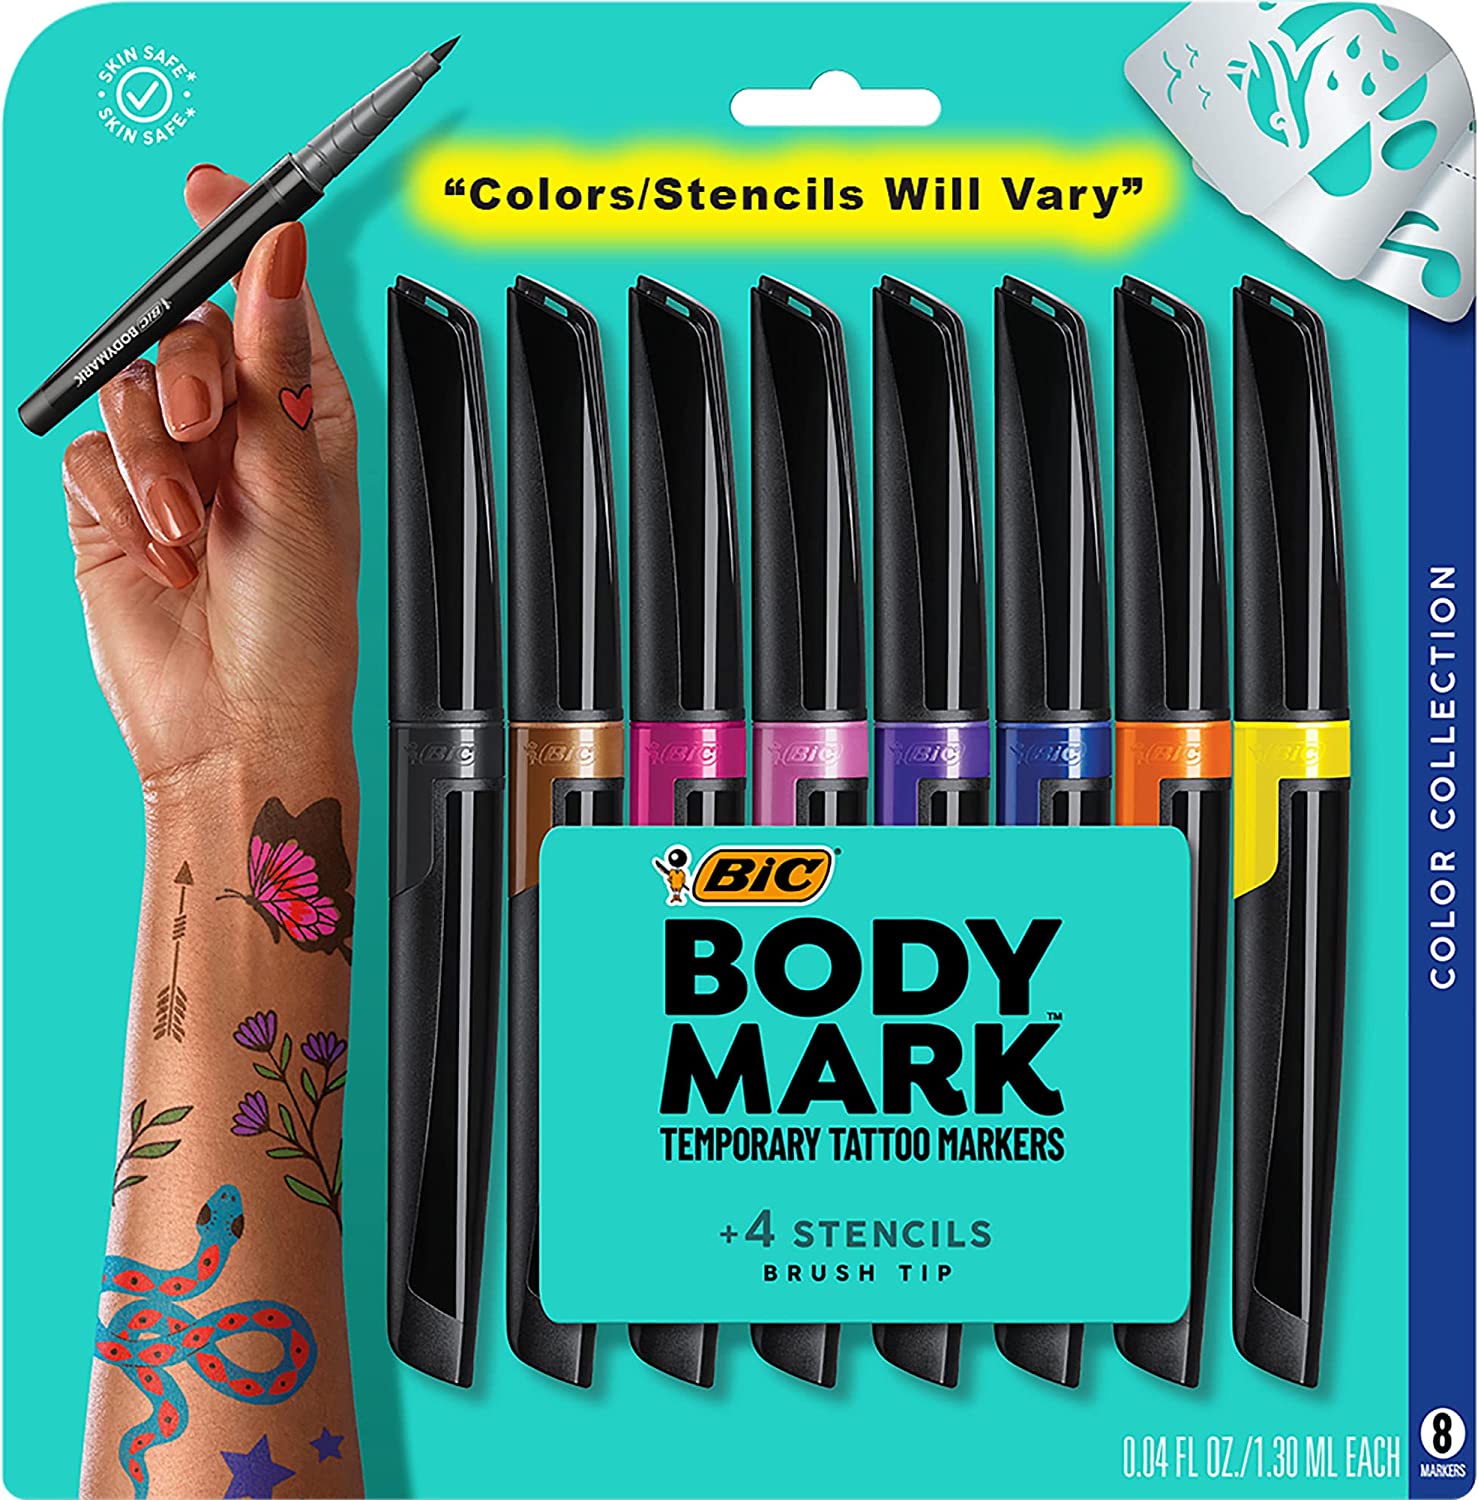 BIC BodyMark Temporary Tattoo Markers for Skin Color Collection Flexible Brush Tip 8-Count Pack of Assorted Colors Skin-Safe* Cosmetic Quality (MTBP81-AST) 1 Count (Pack of 8)